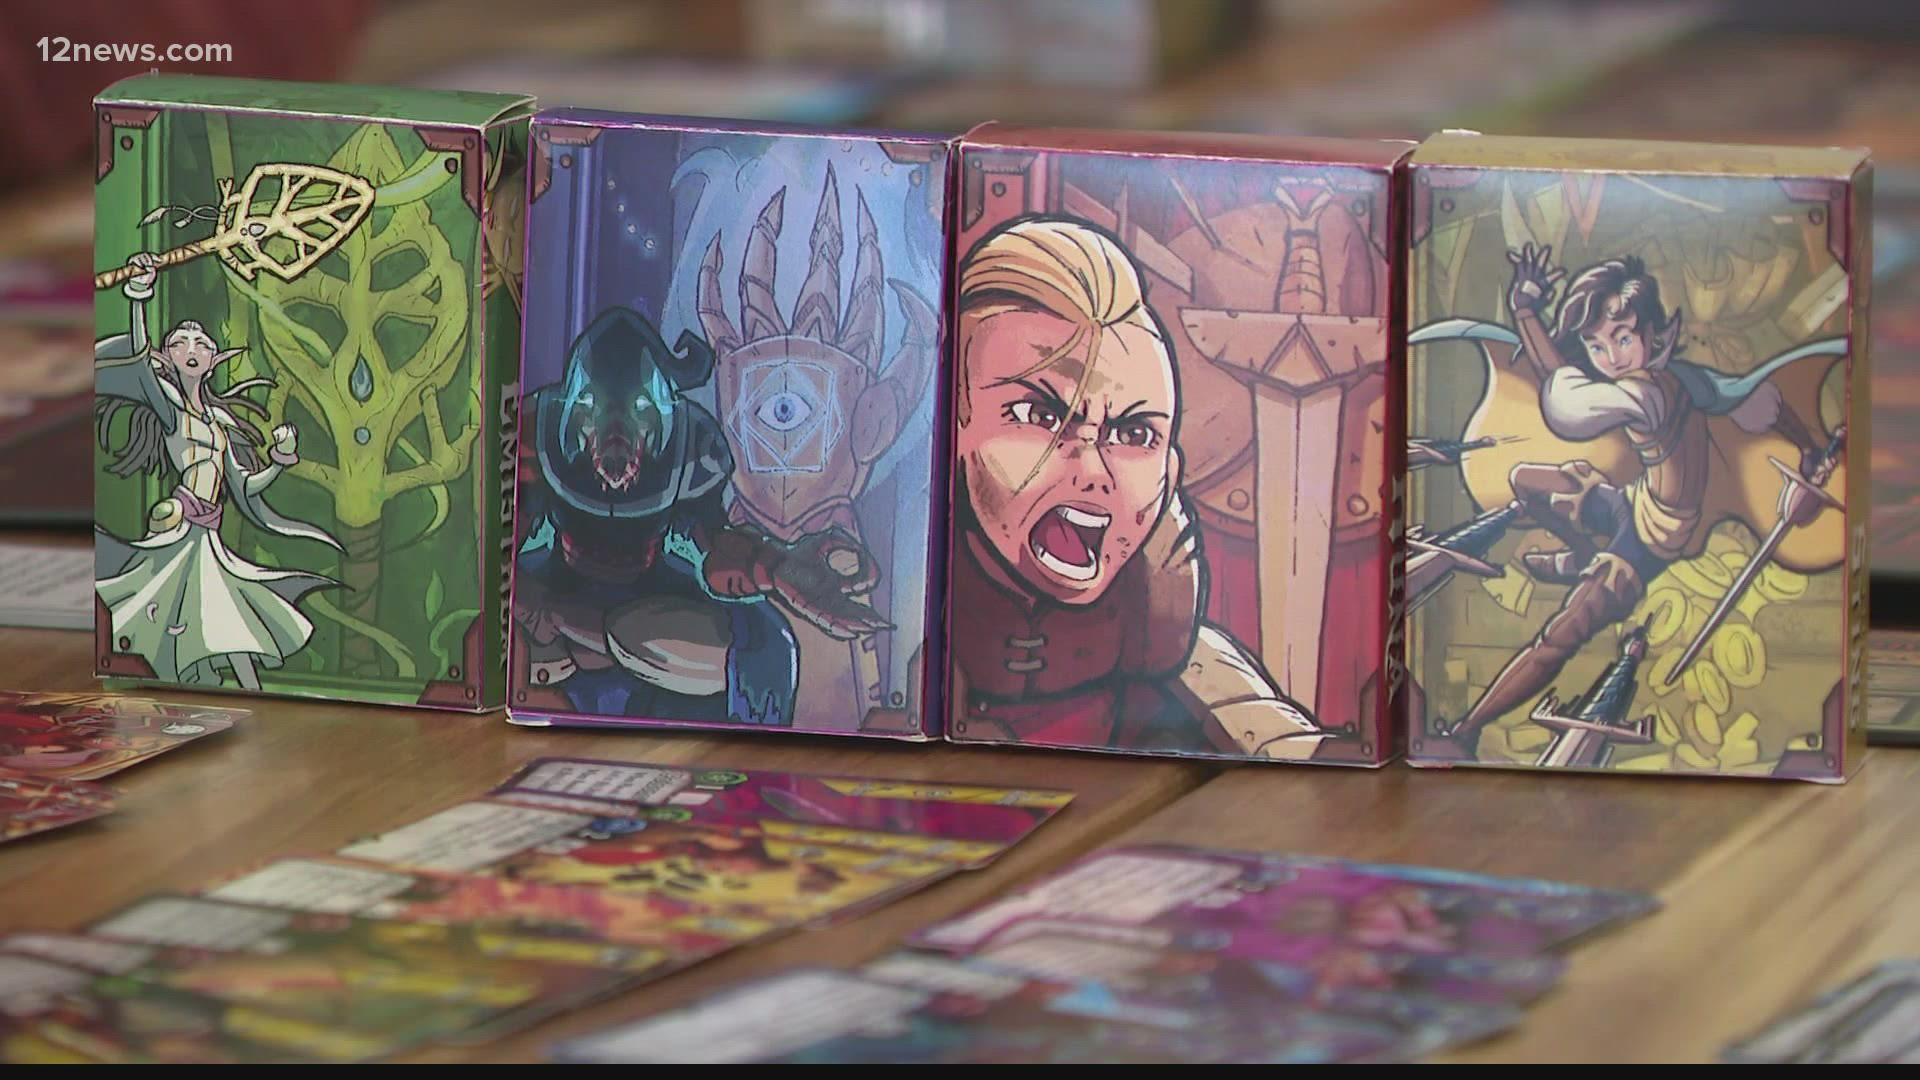 Boss Battle is a "3v1 strategy card game" where players choose a class and take part in a fight to the death against an "epic boss," the game's website said.